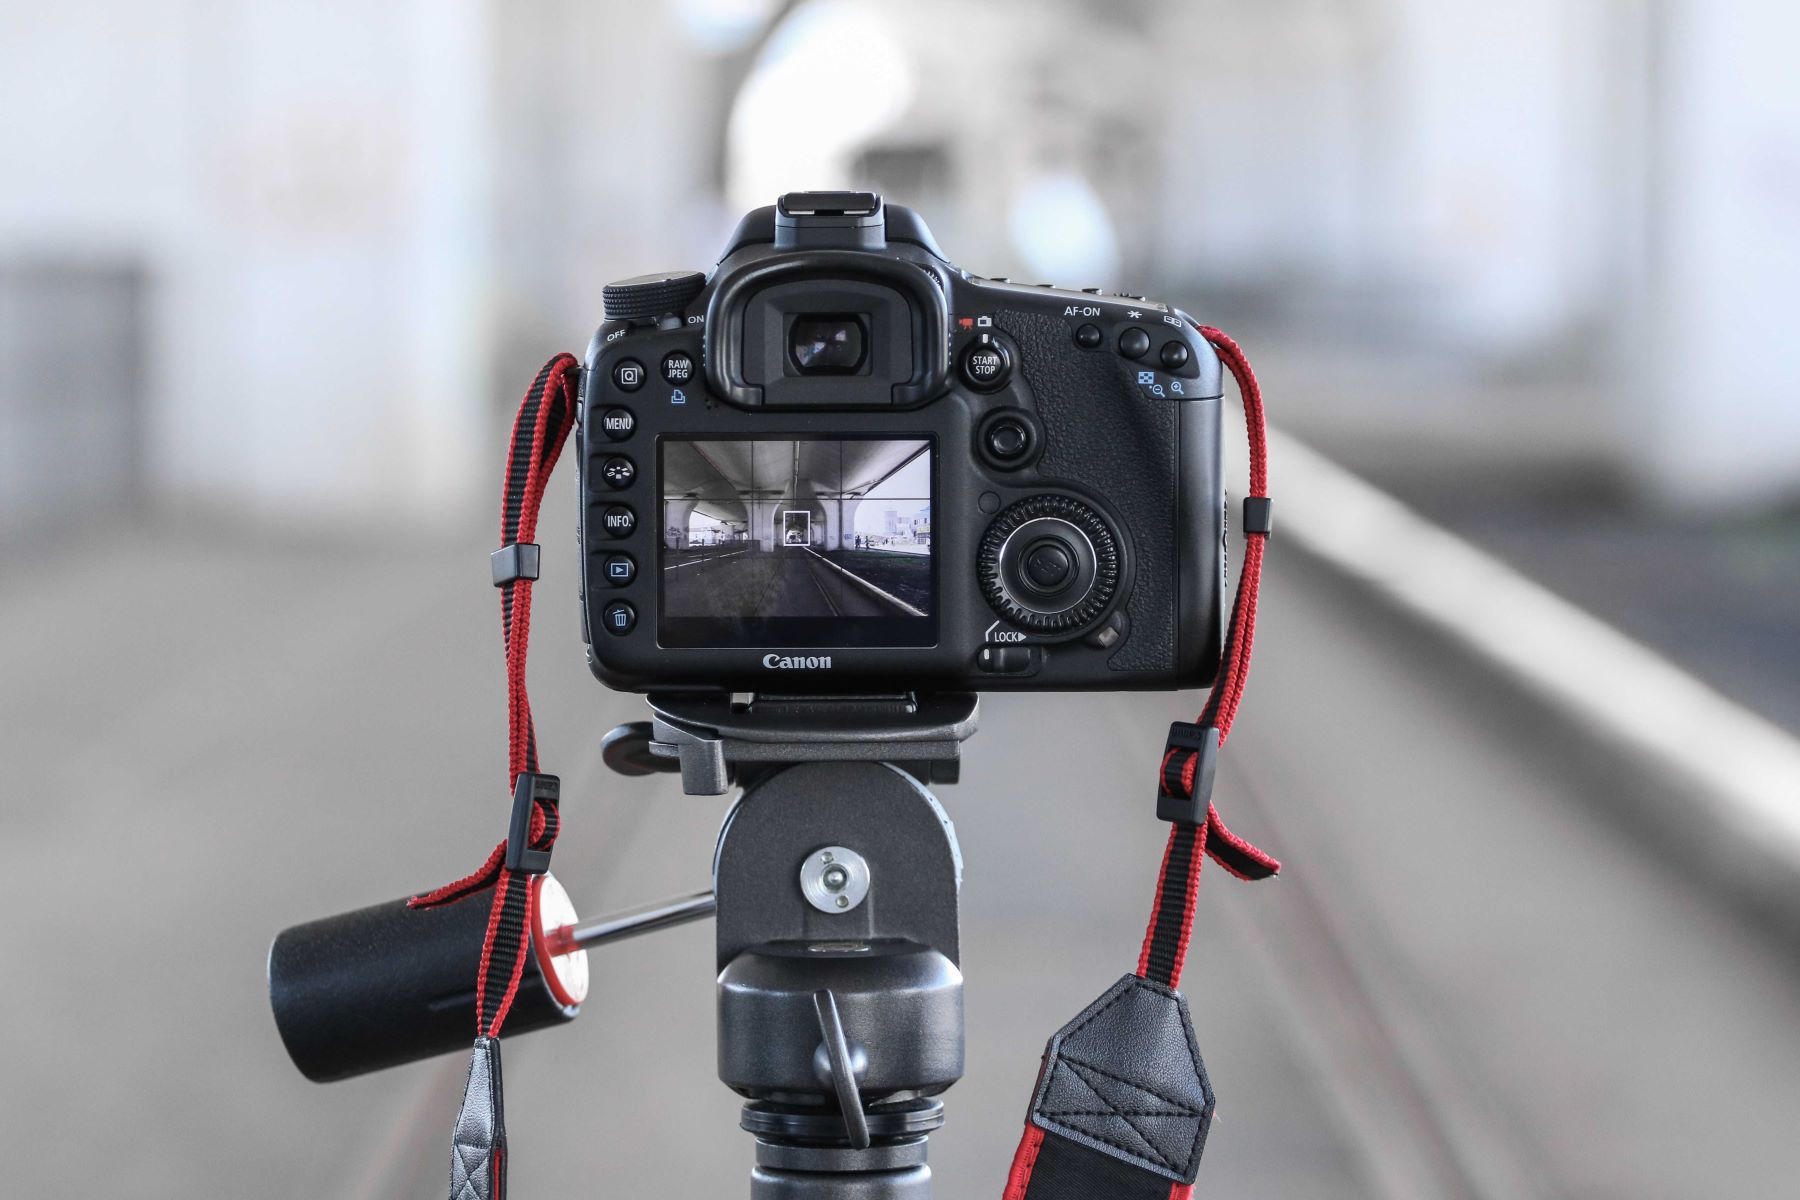 How To Use A DSLR Camera